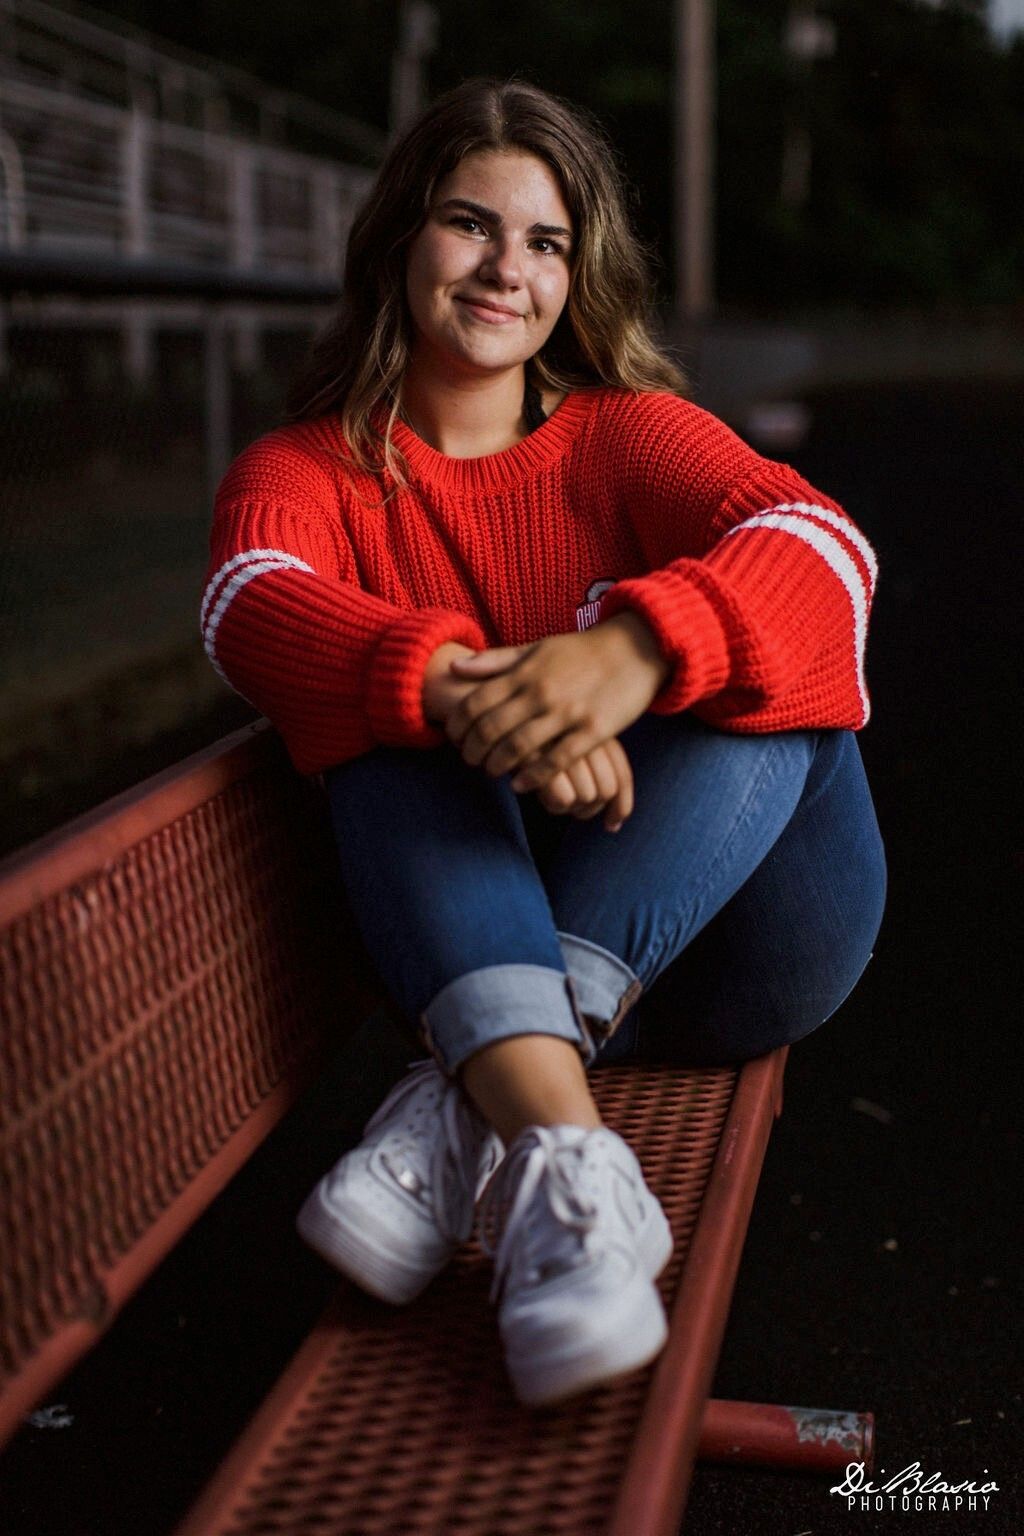 Mya Lepley happily sits on a red bench with her arms wrapped around her crossed legs.